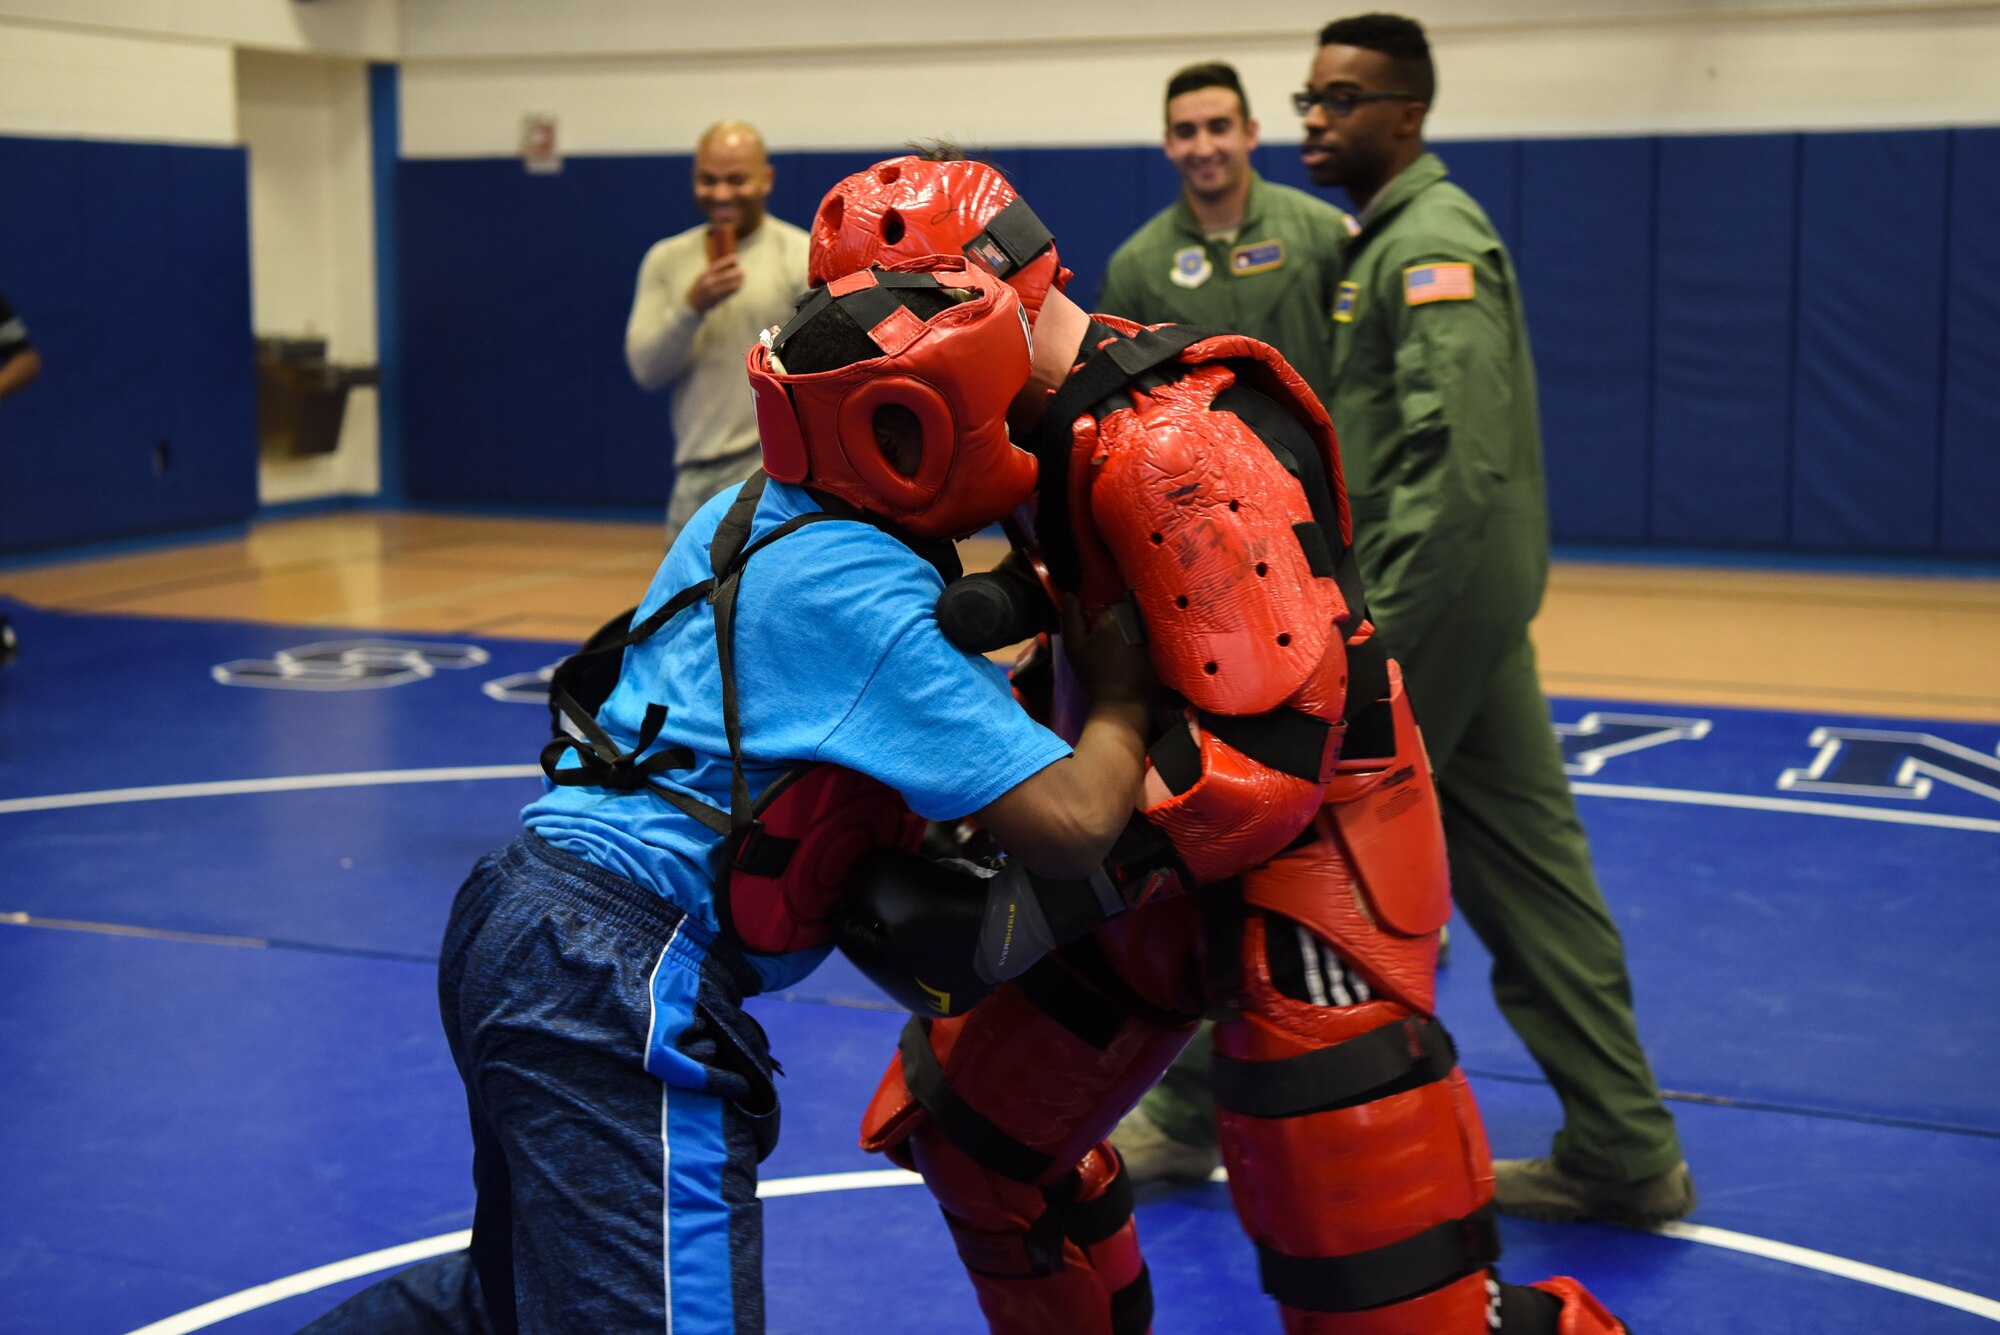 Staff Sgt. Michael Rice, 436th Security Forces Squadron raven, and a Central Middle School student partake in baton training during a demonstration by the Ravens March 8, 2018, at Central Middle School in Dover, Del. The students were given an opportunity to go against the “Red Man” after being shown some of the baton strikes the Ravens use. (U.S. Air Force Photo by Airman 1st Class Zoe M. Wockenfuss)